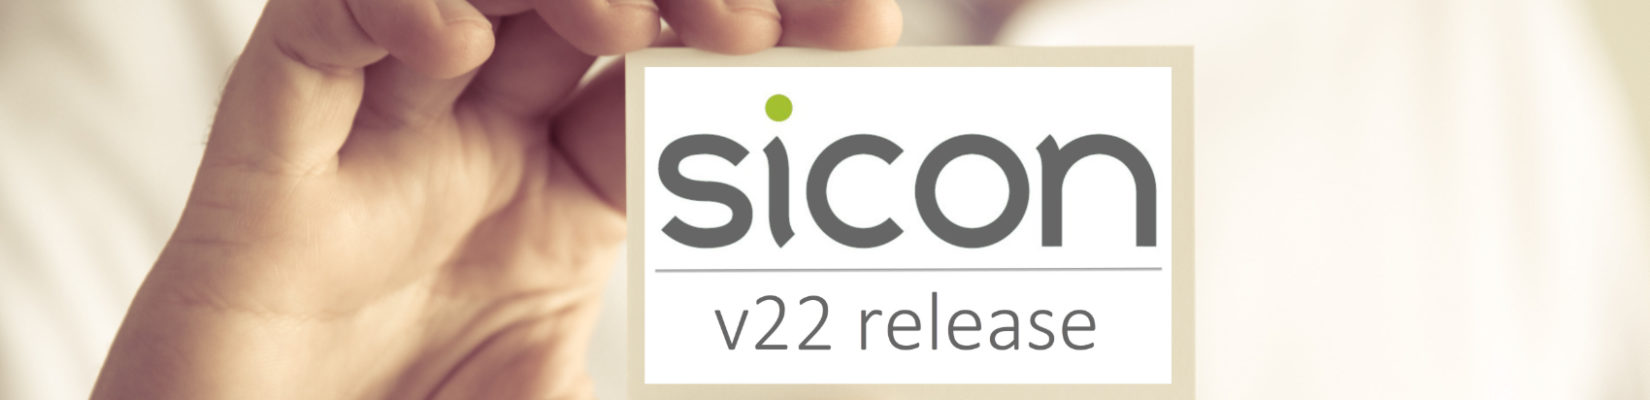 Sicon v22 New Features & Important Information